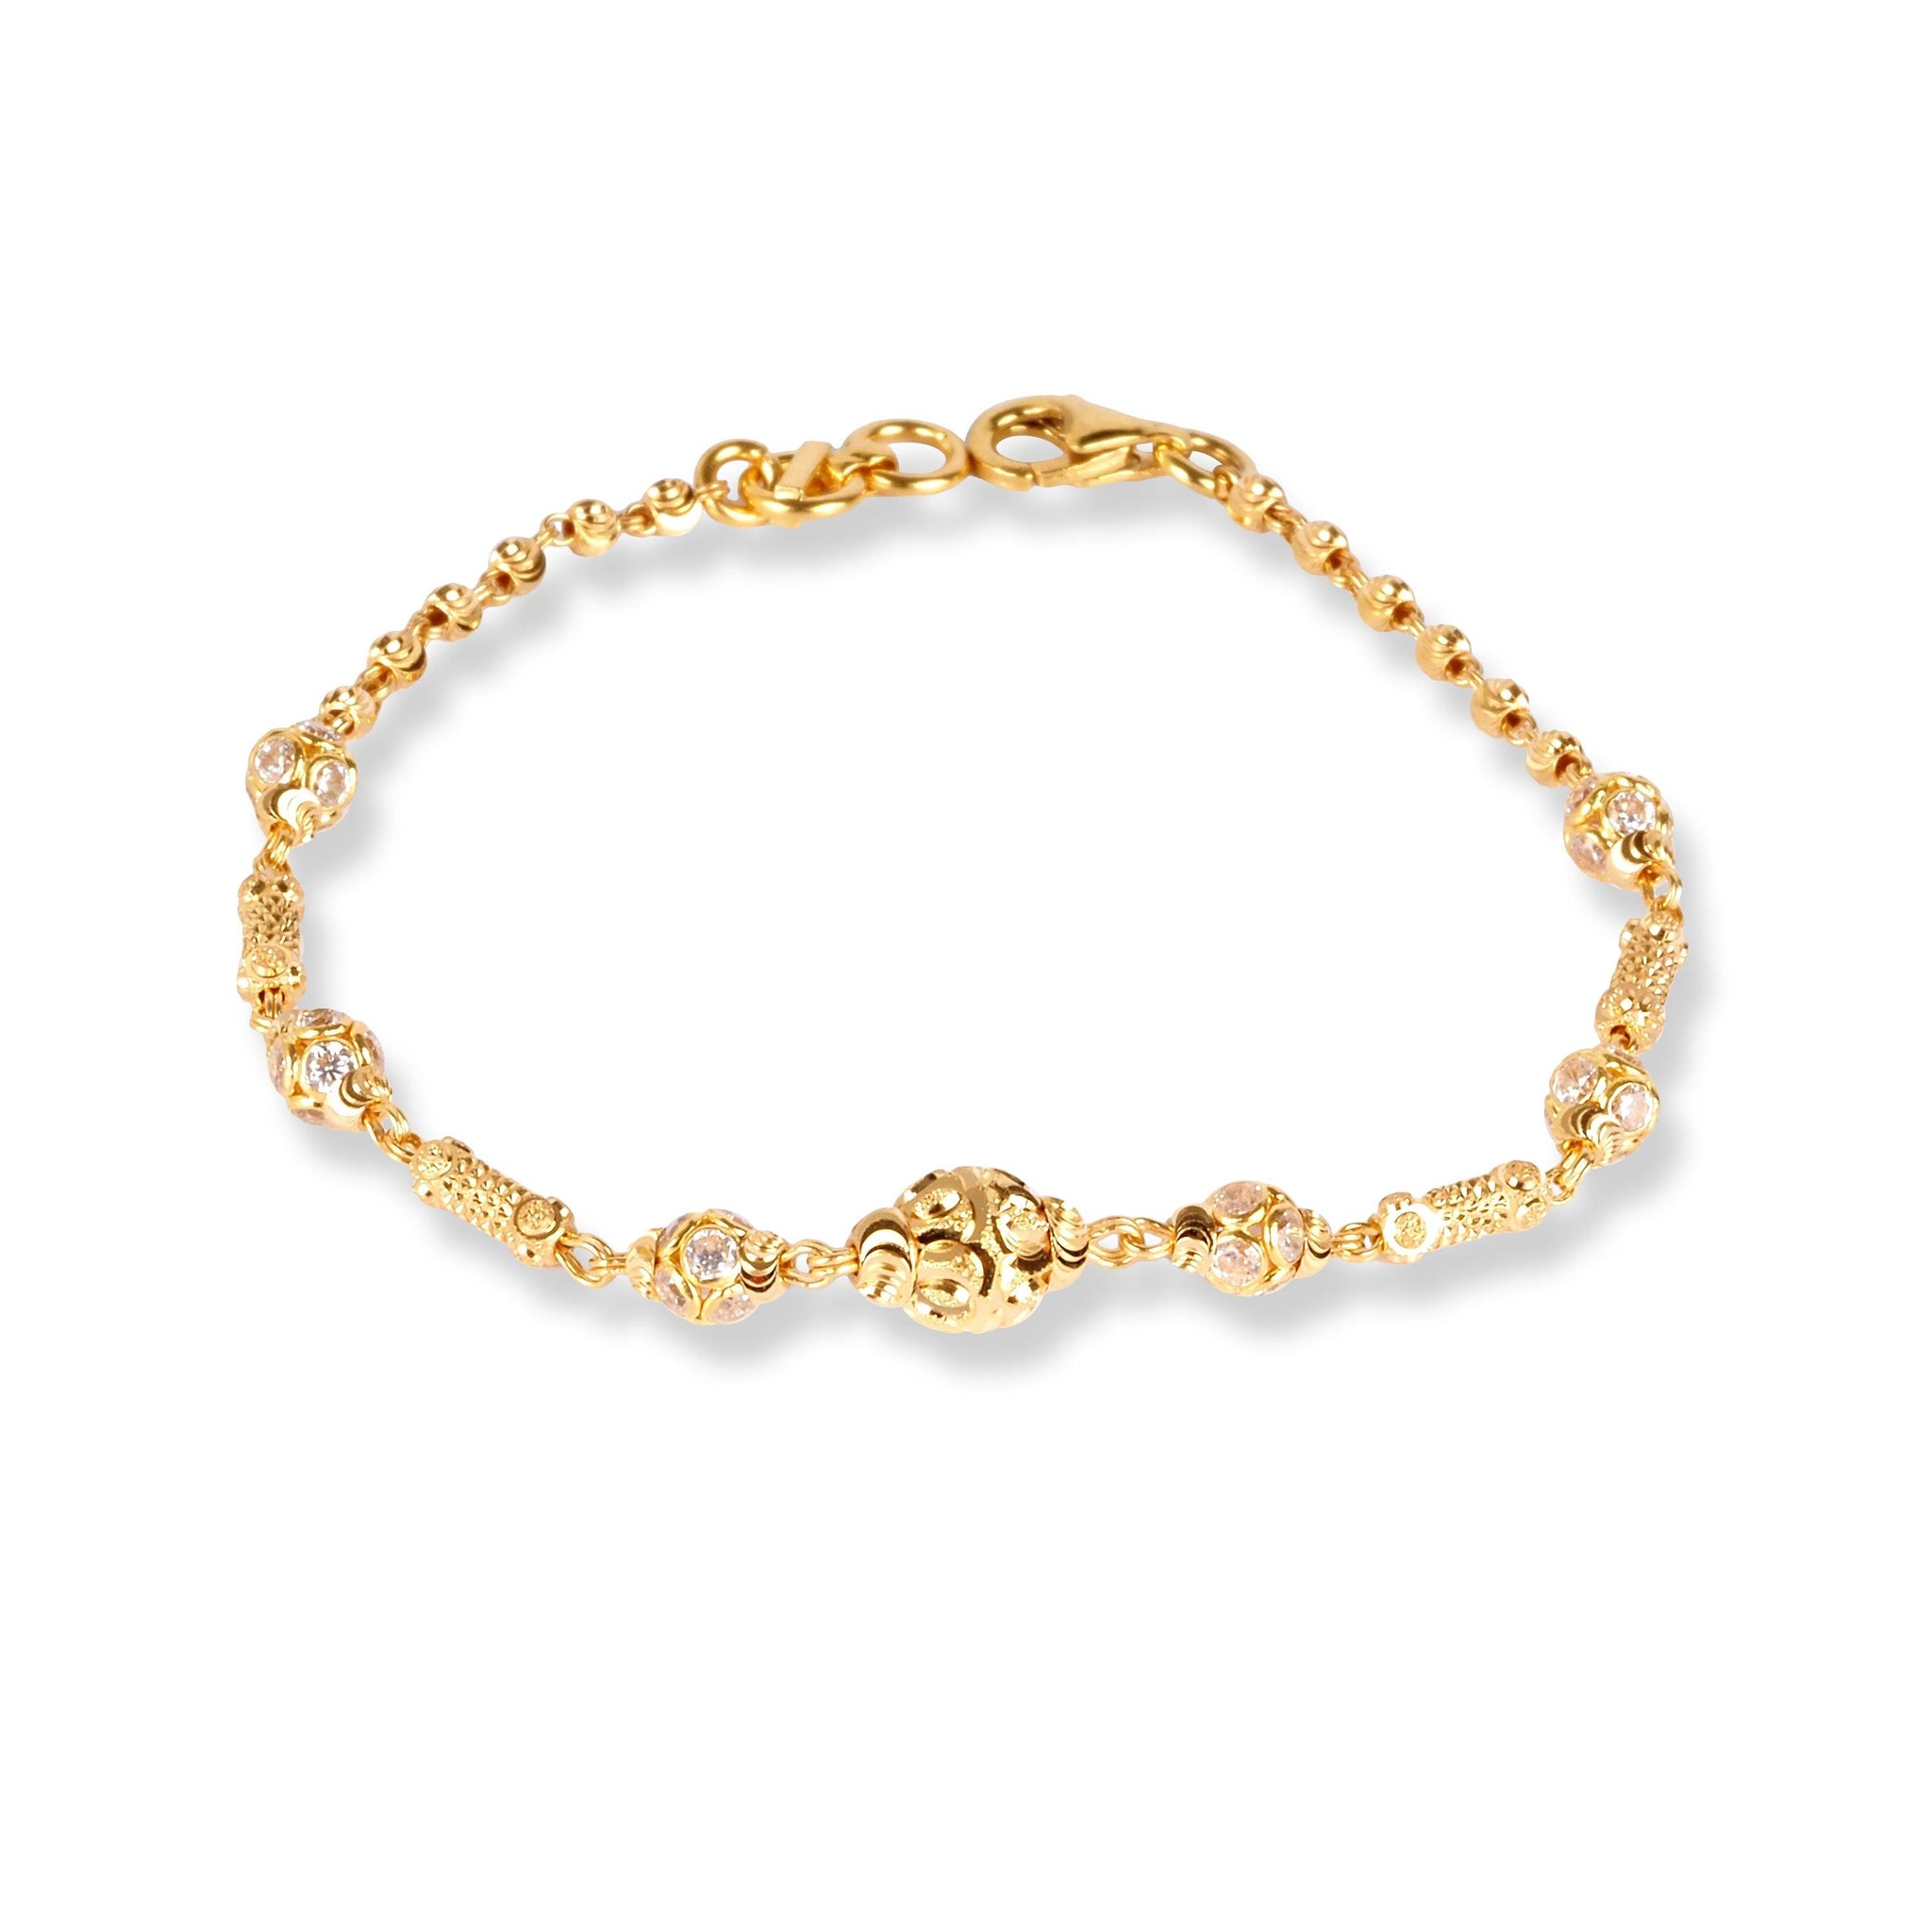 22ct Gold Bracelet with Diamond Cut Beads and Cubic Zirconia Stones LBR-8480